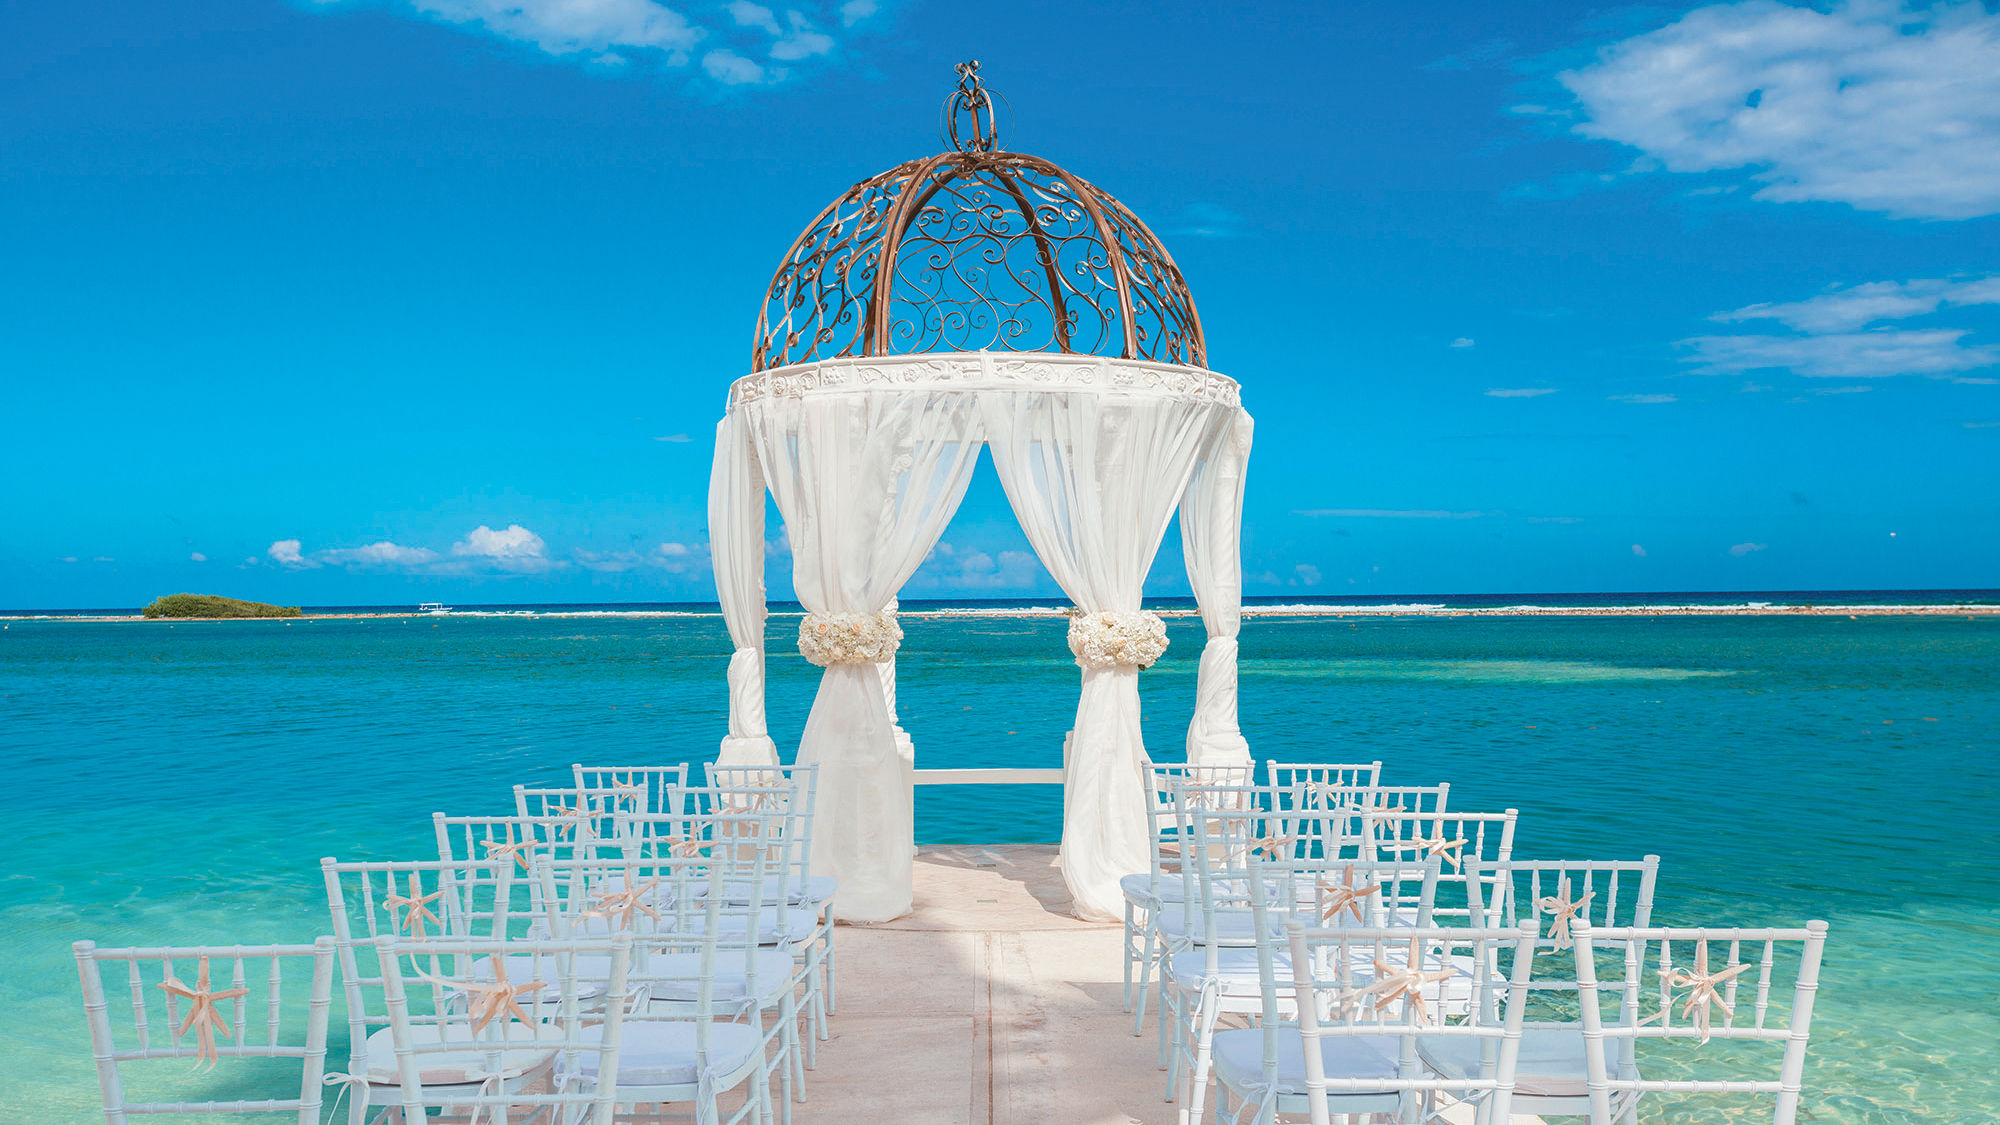 A New Place for a Wedding in Barbados